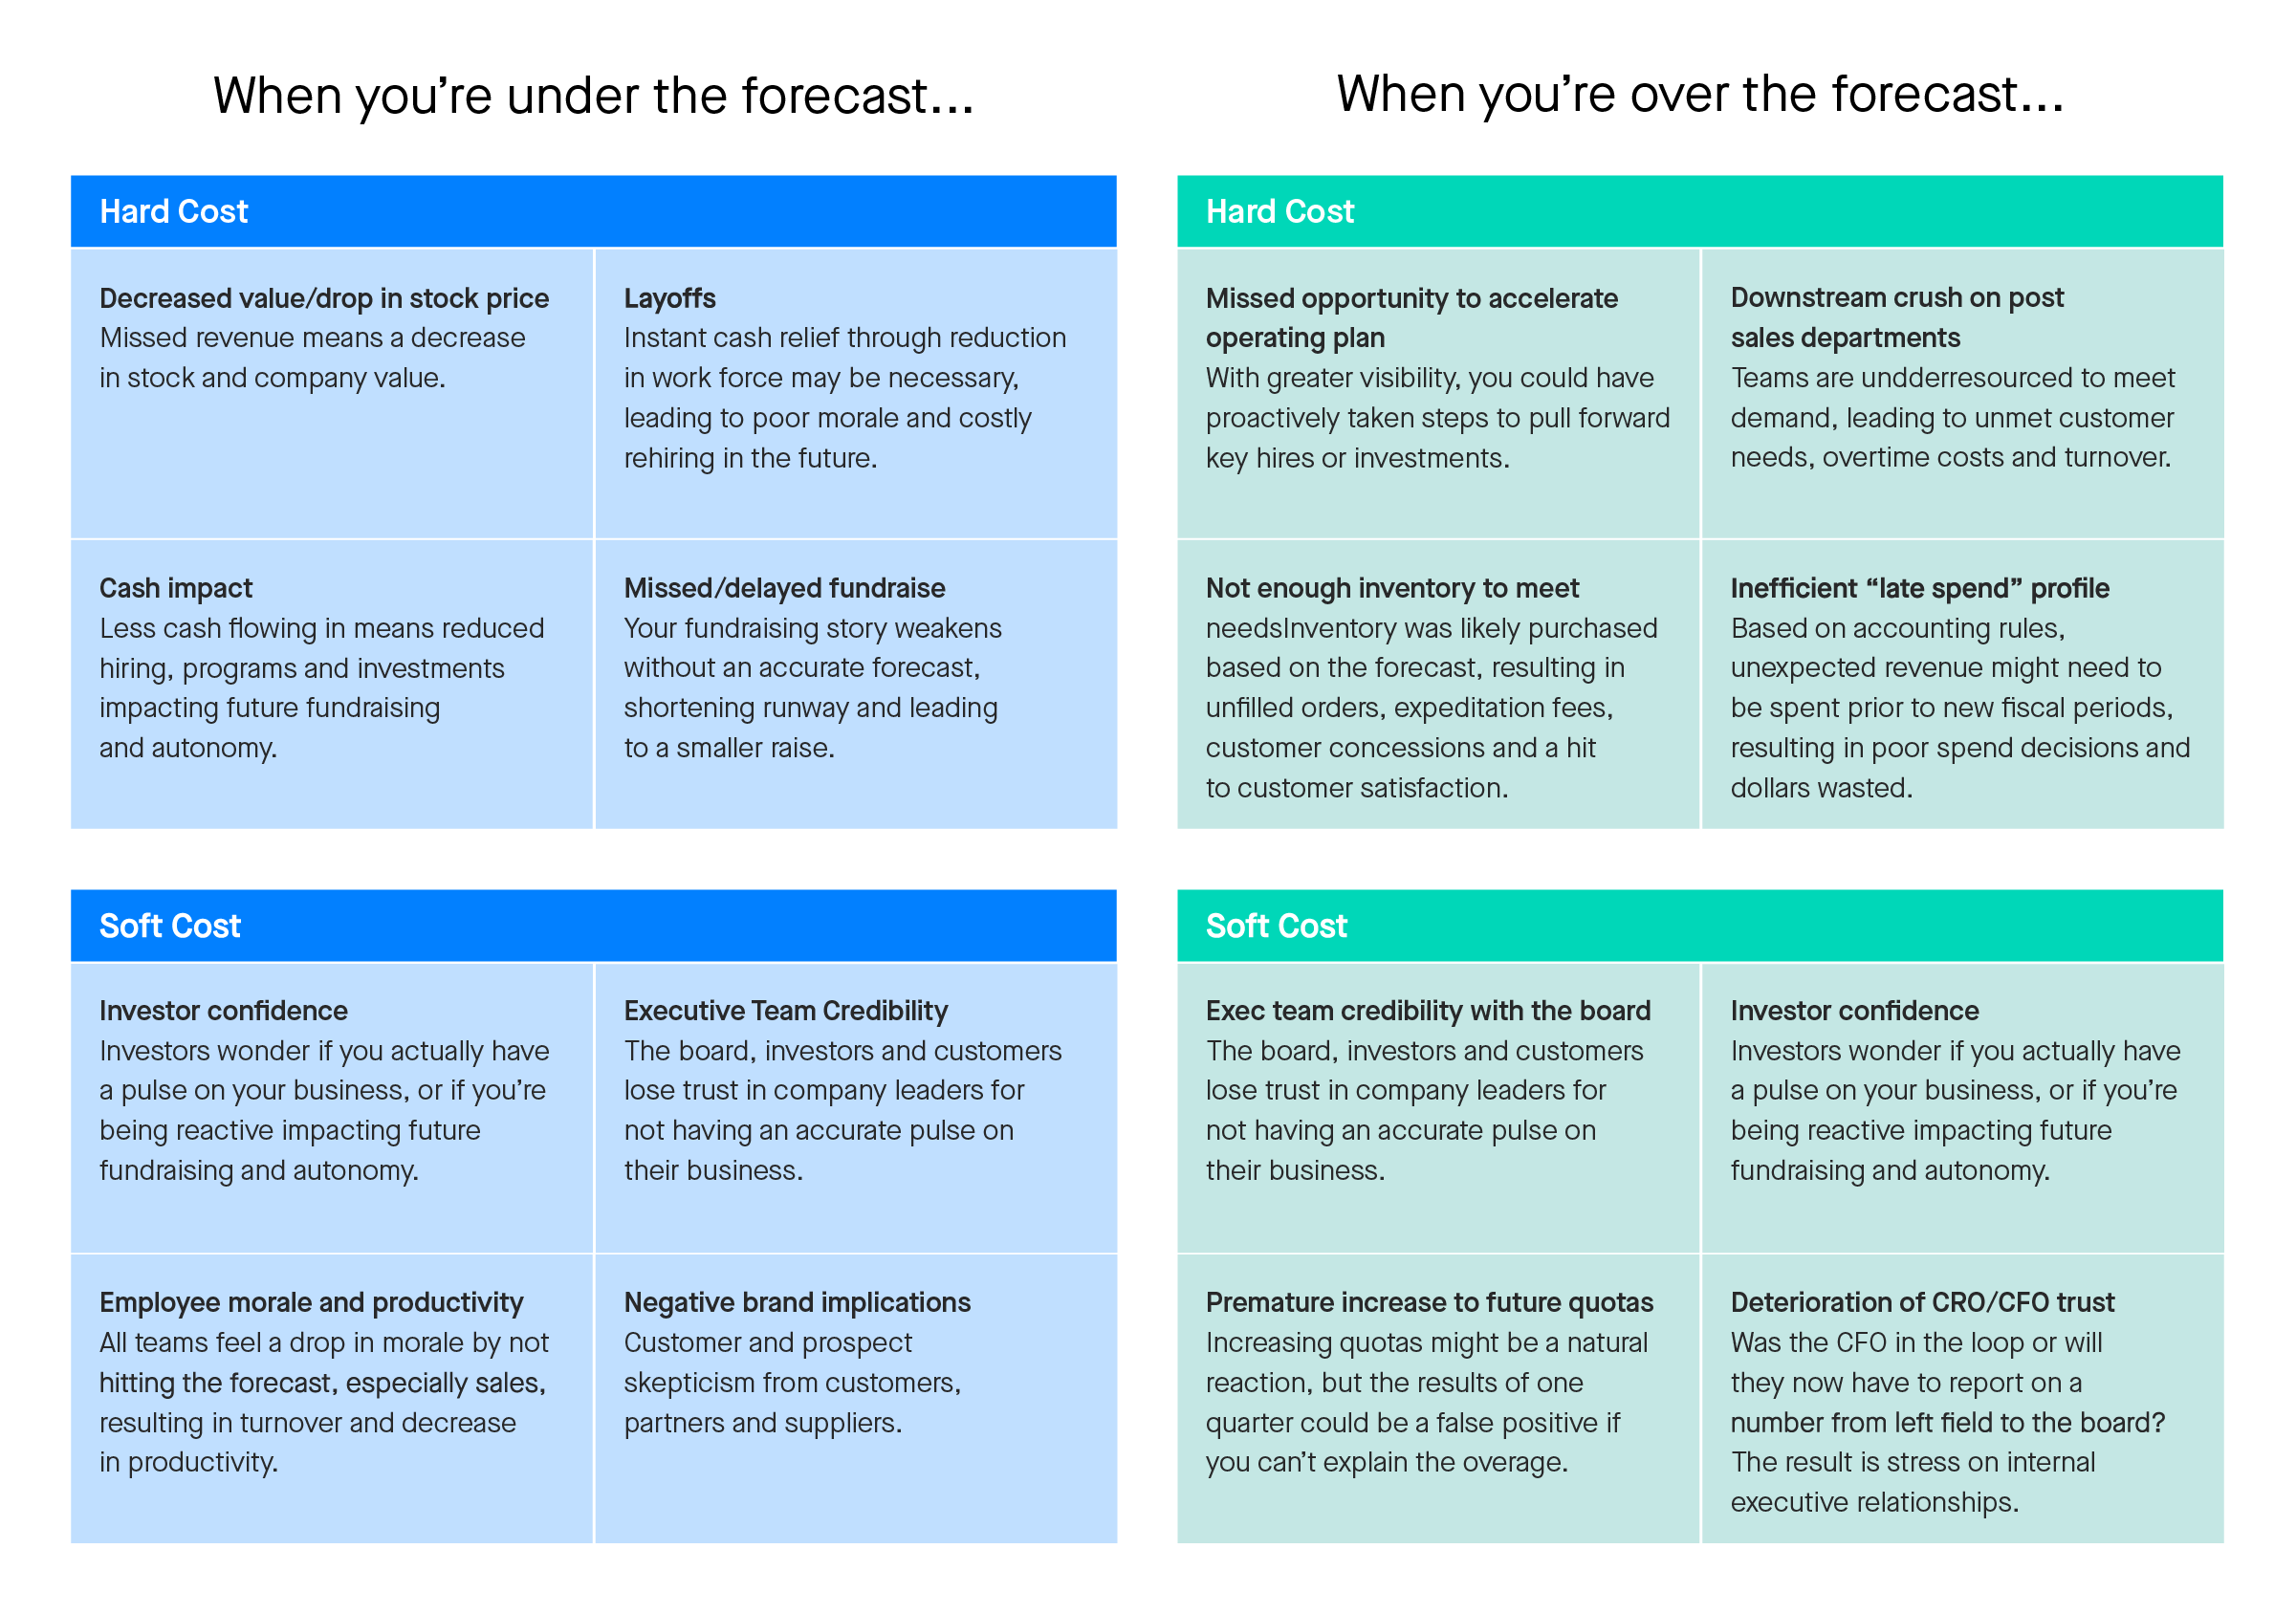 Infographic titled The Impact of Missing Your Forecast with two tables titled When you're under the forecast and When you're over the forecast